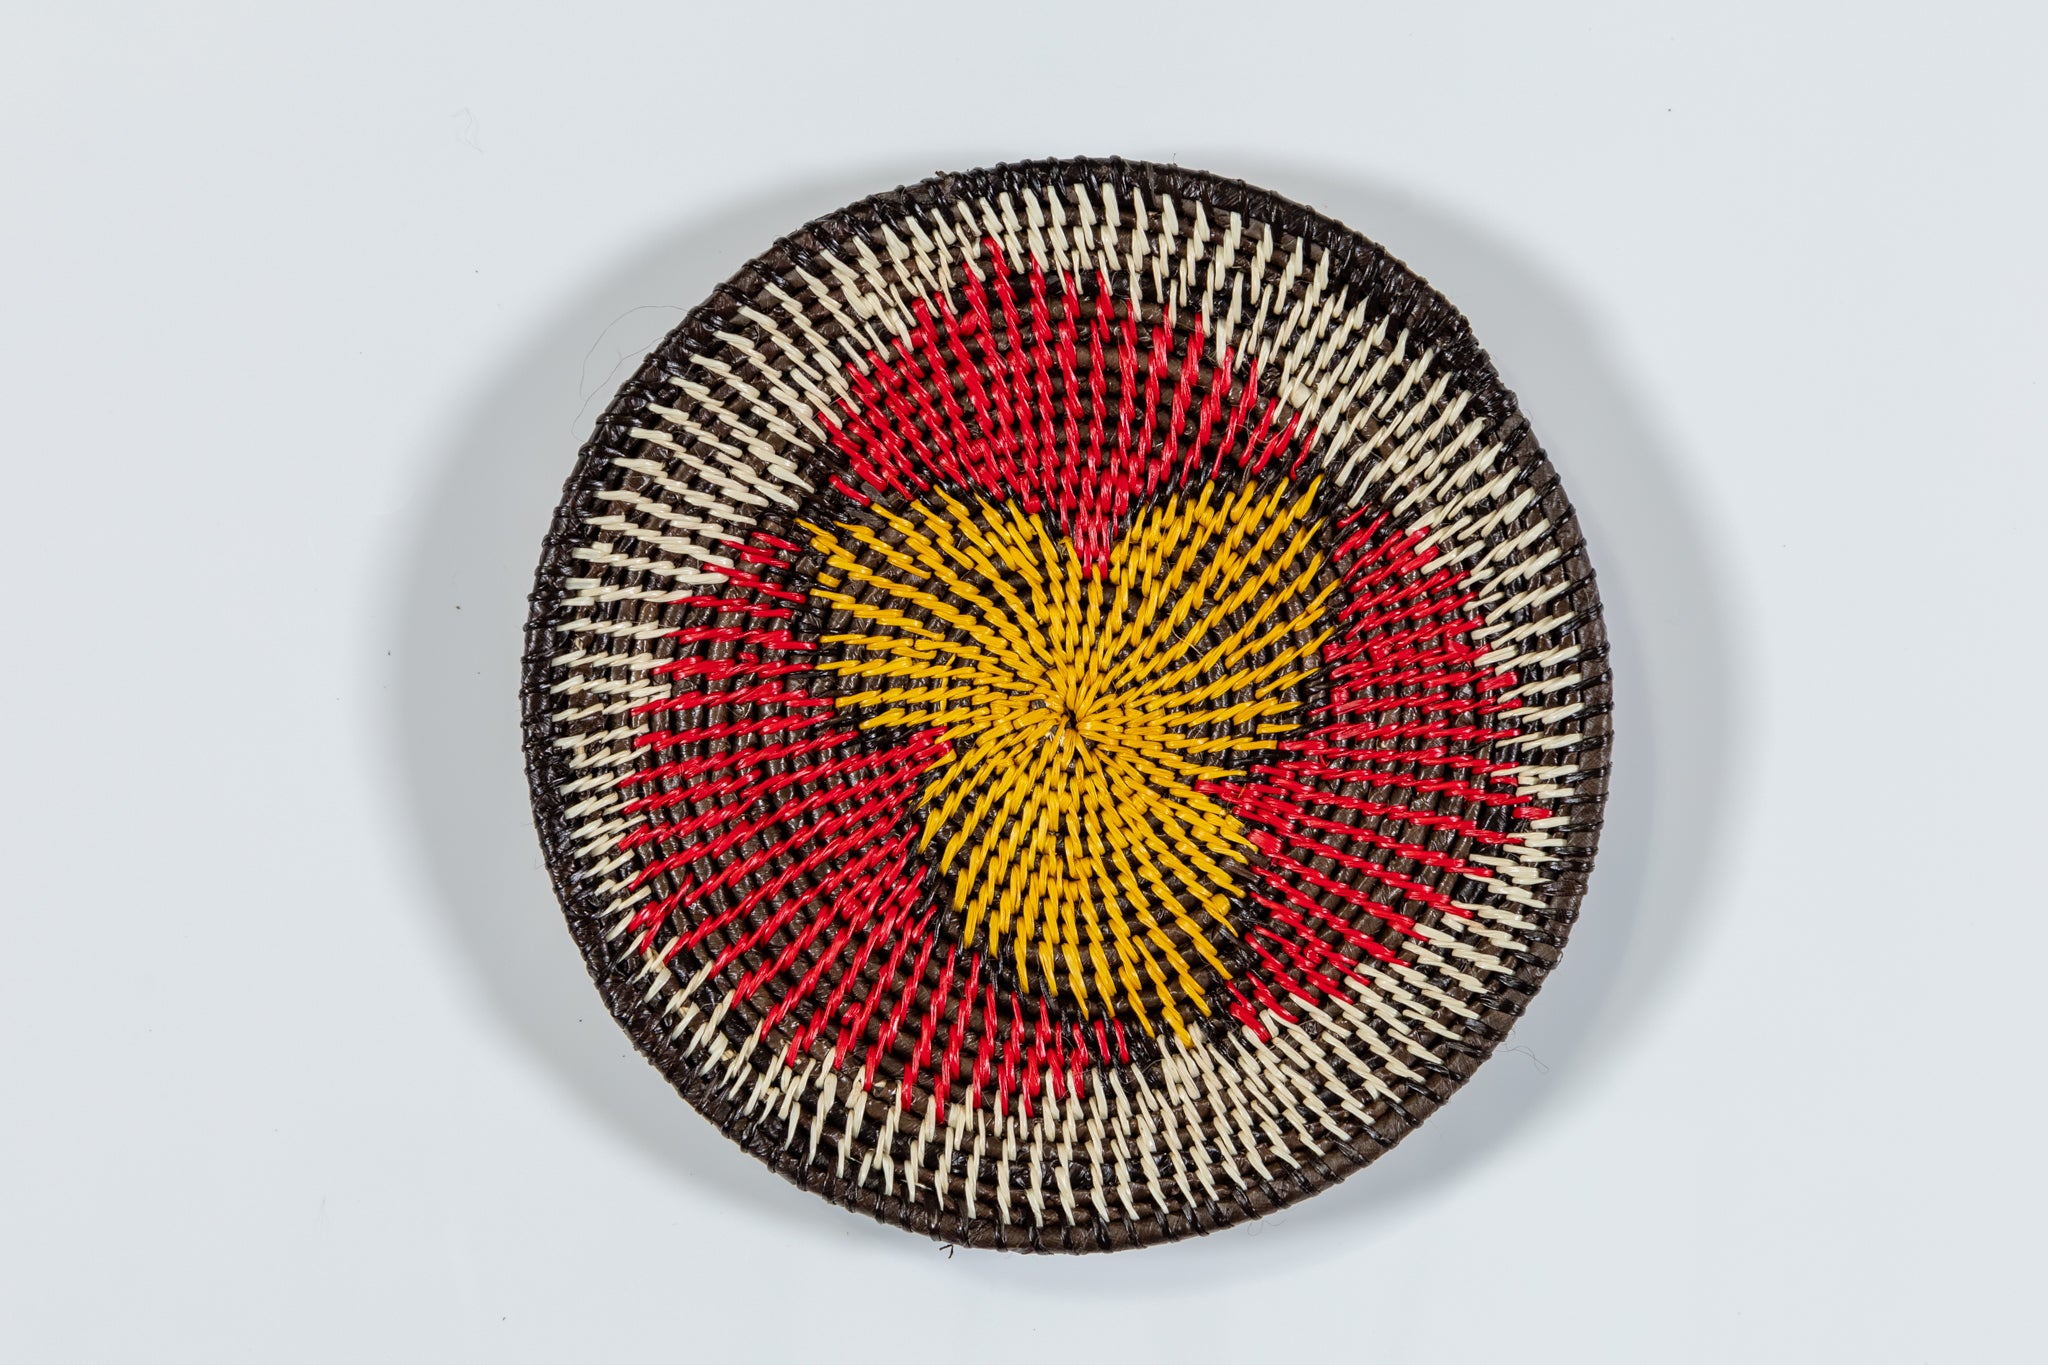 Ring of Fire Small Basket Plate